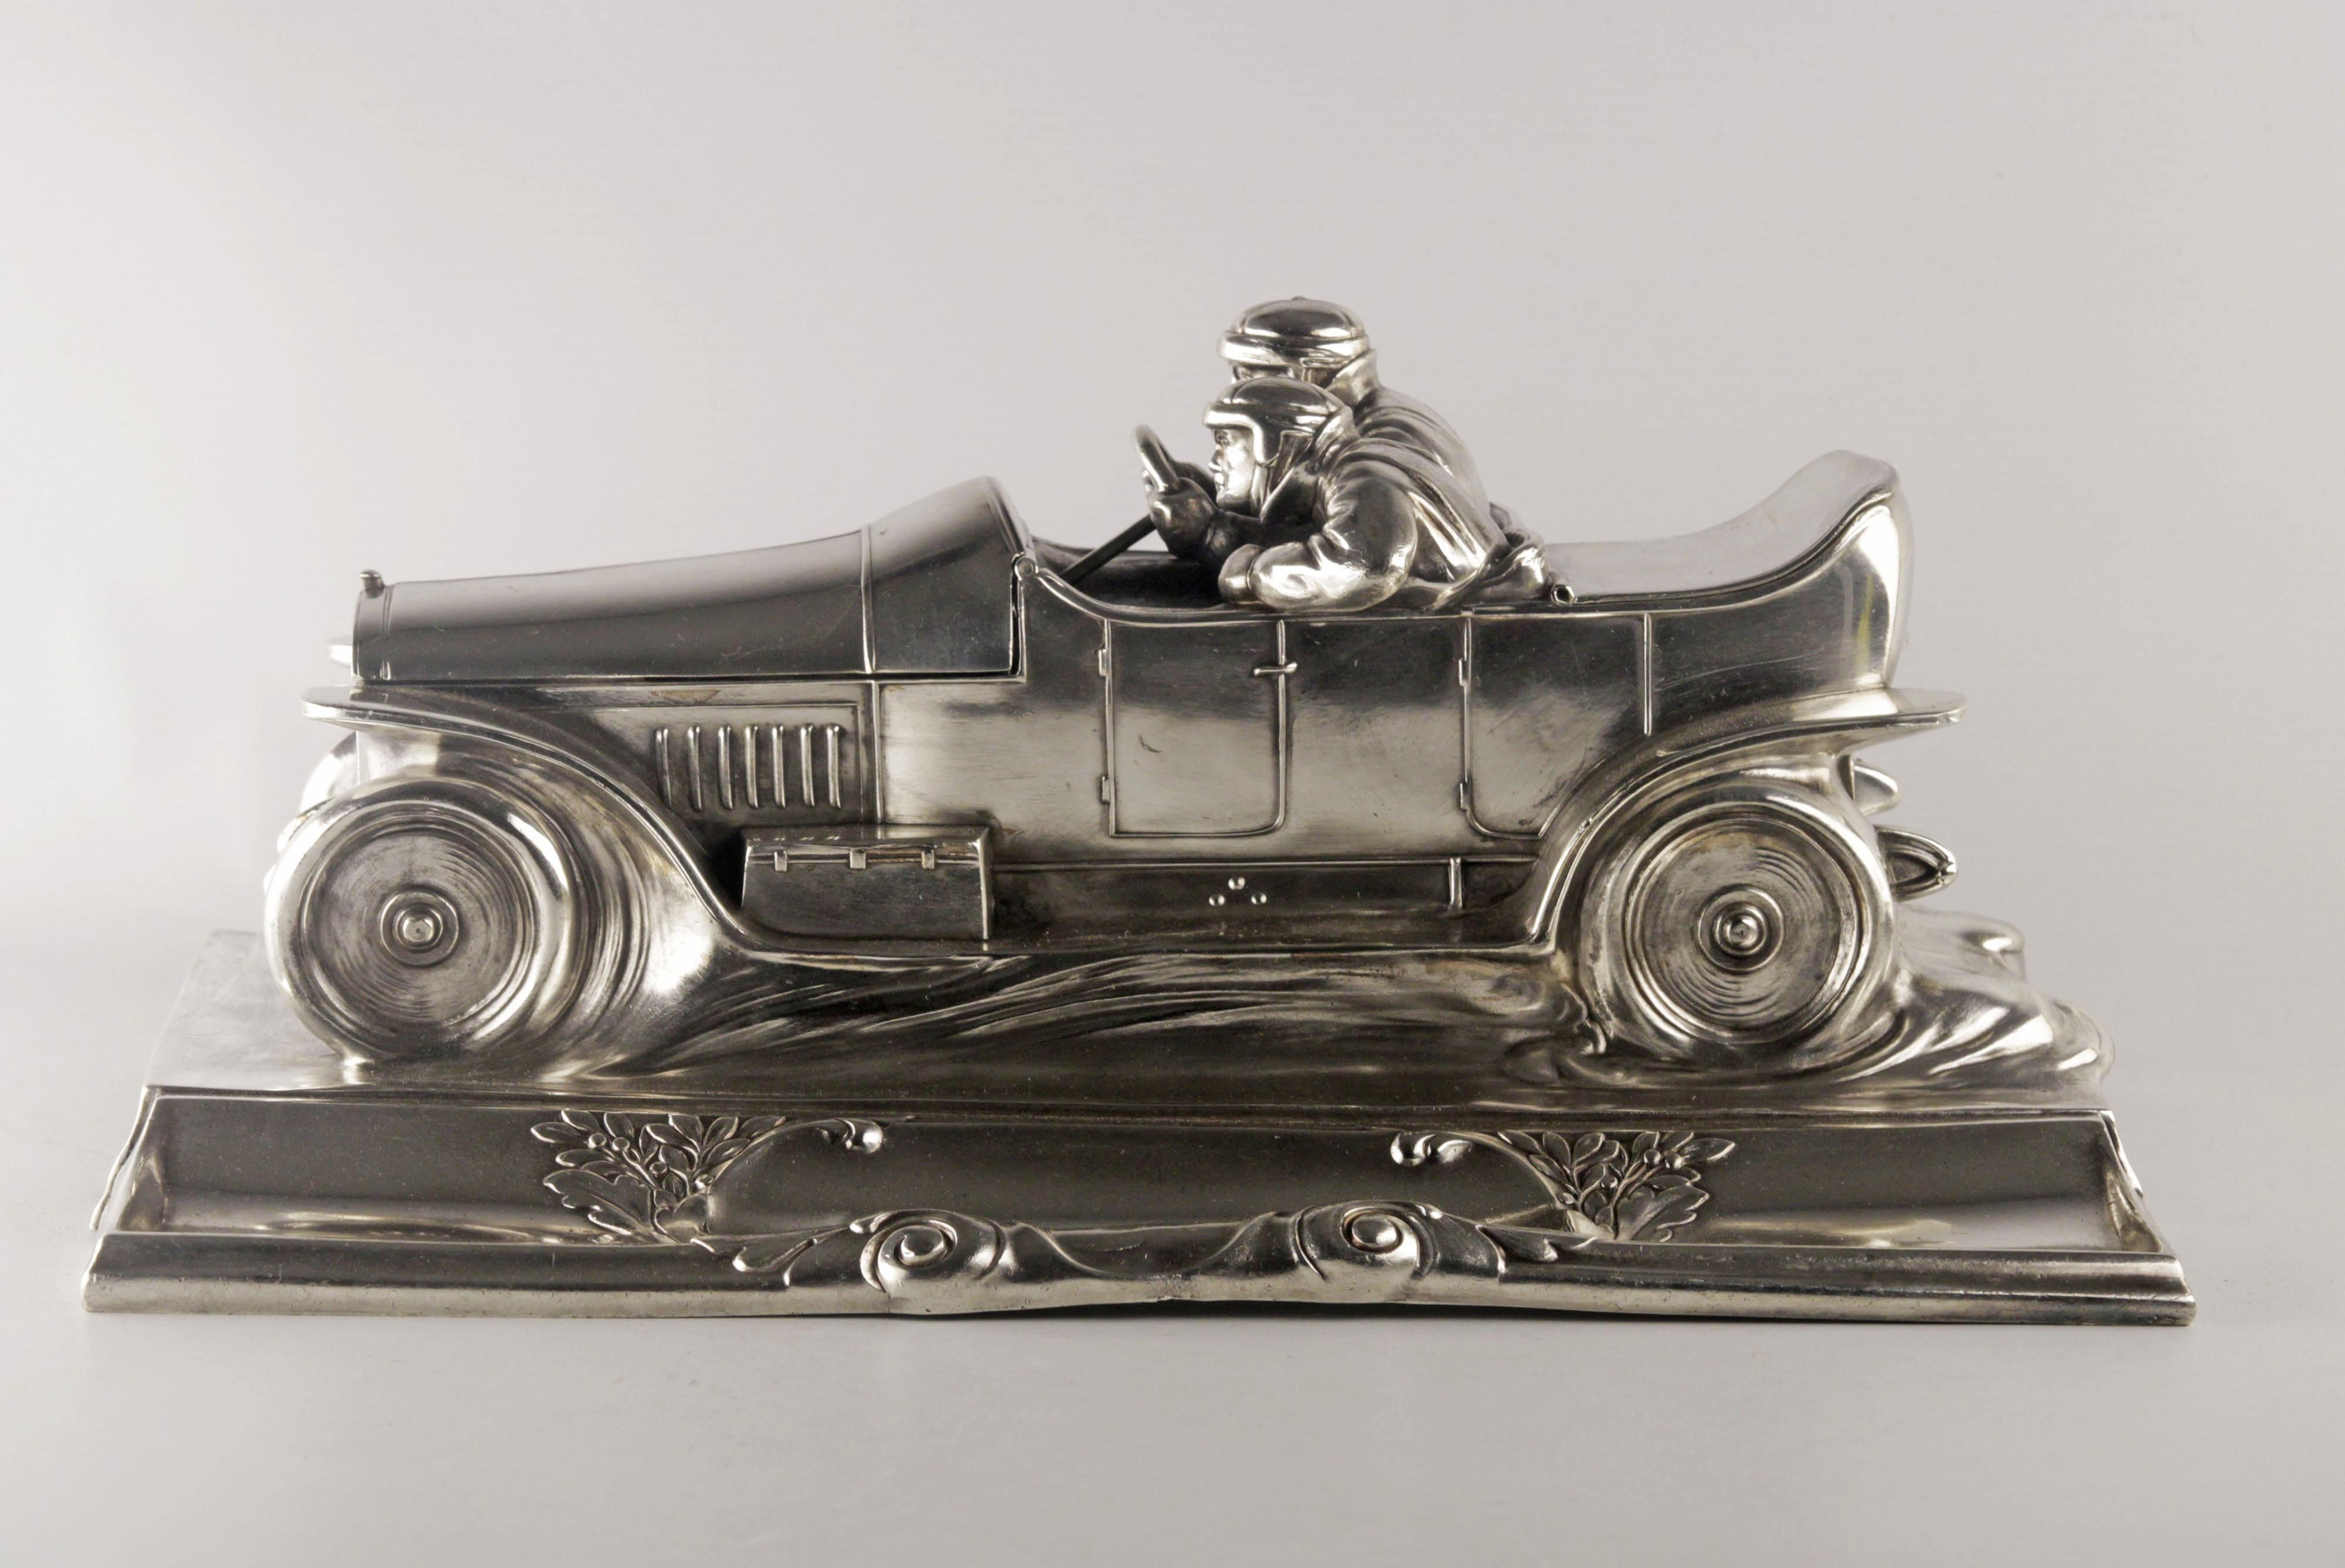 Inkwell WMF racing car
Desk inkwell
Origin Germany Circa 1915-1920
Manufacturer WMF
Very good condition with original patina
Natural wear.